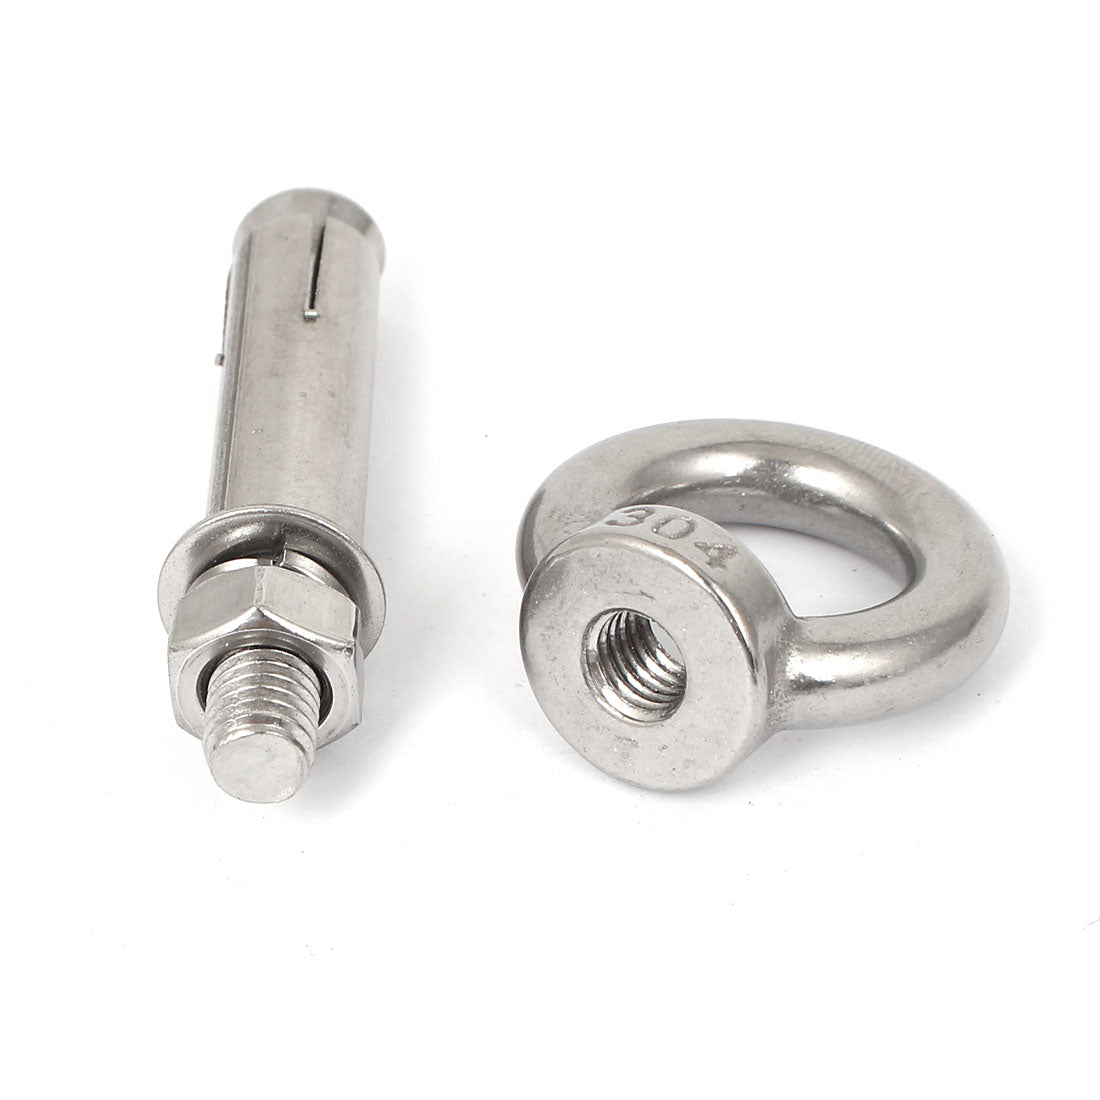 uxcell Uxcell M8x60mm Wall 304 Stainless Steel Expansion Screw Closed Hook Shield Bolts 2pcs